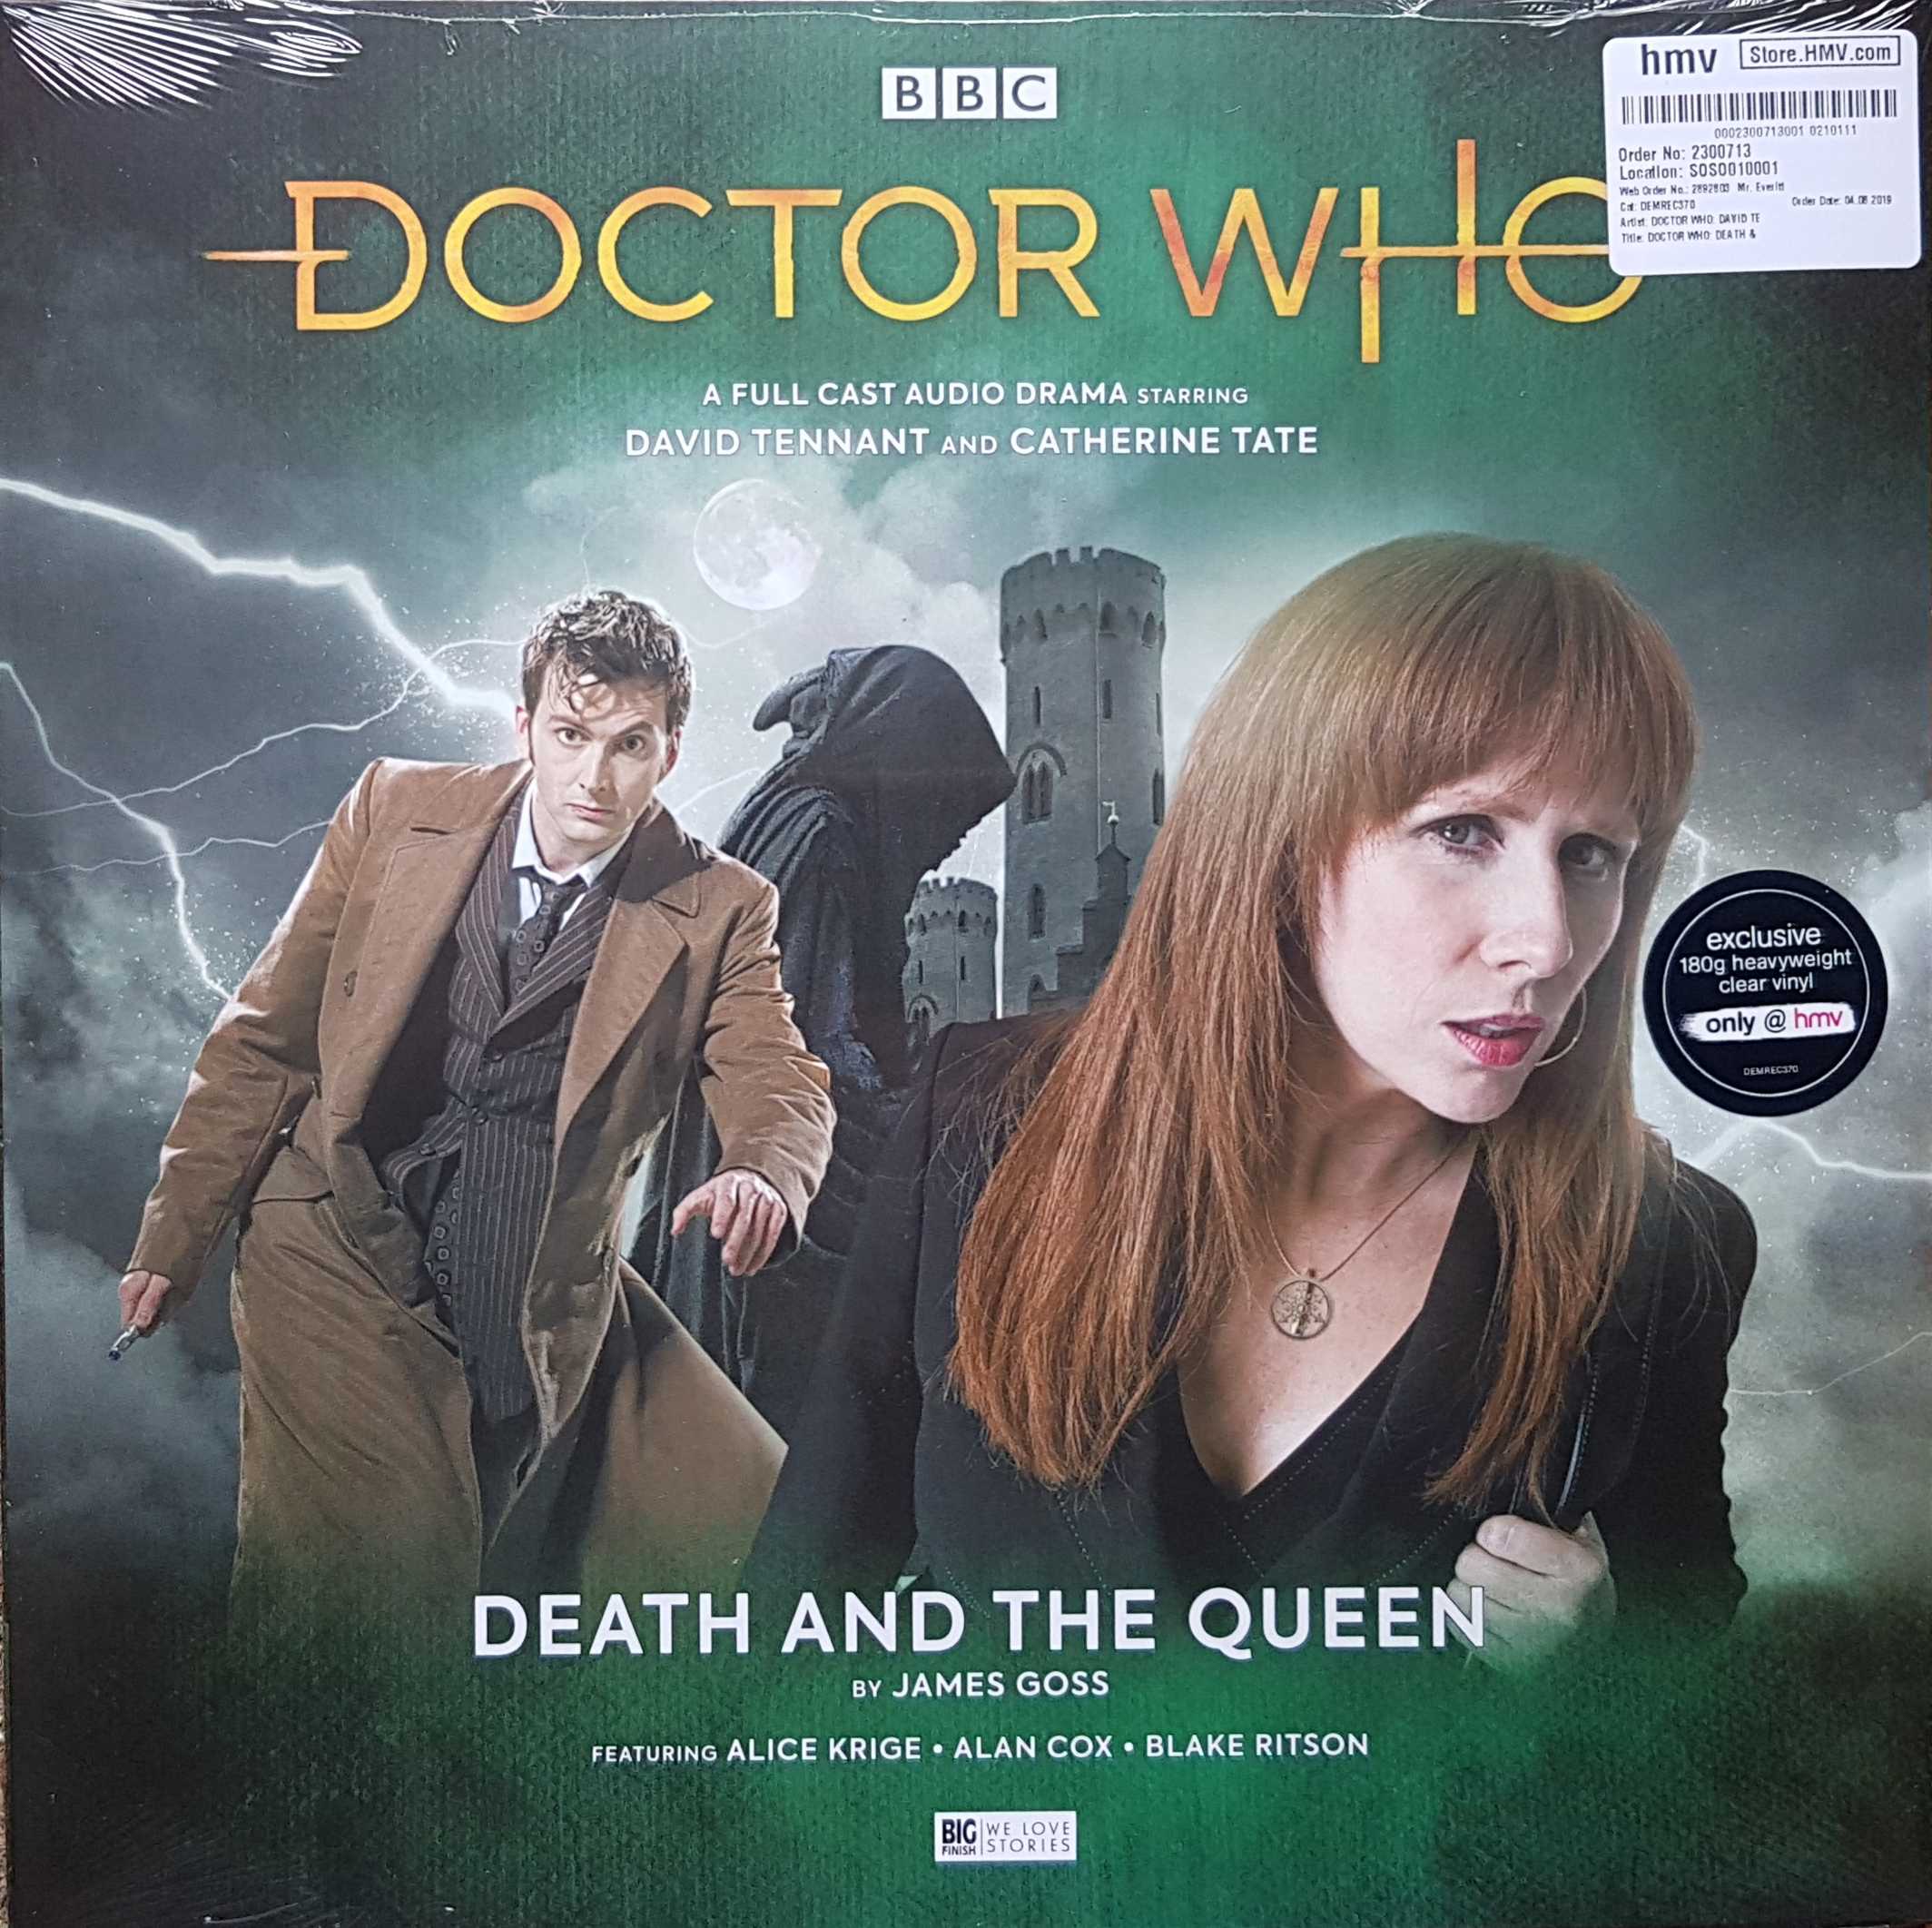 Picture of Doctor Who - Death and the Queen by artist James Goss from the BBC albums - Records and Tapes library